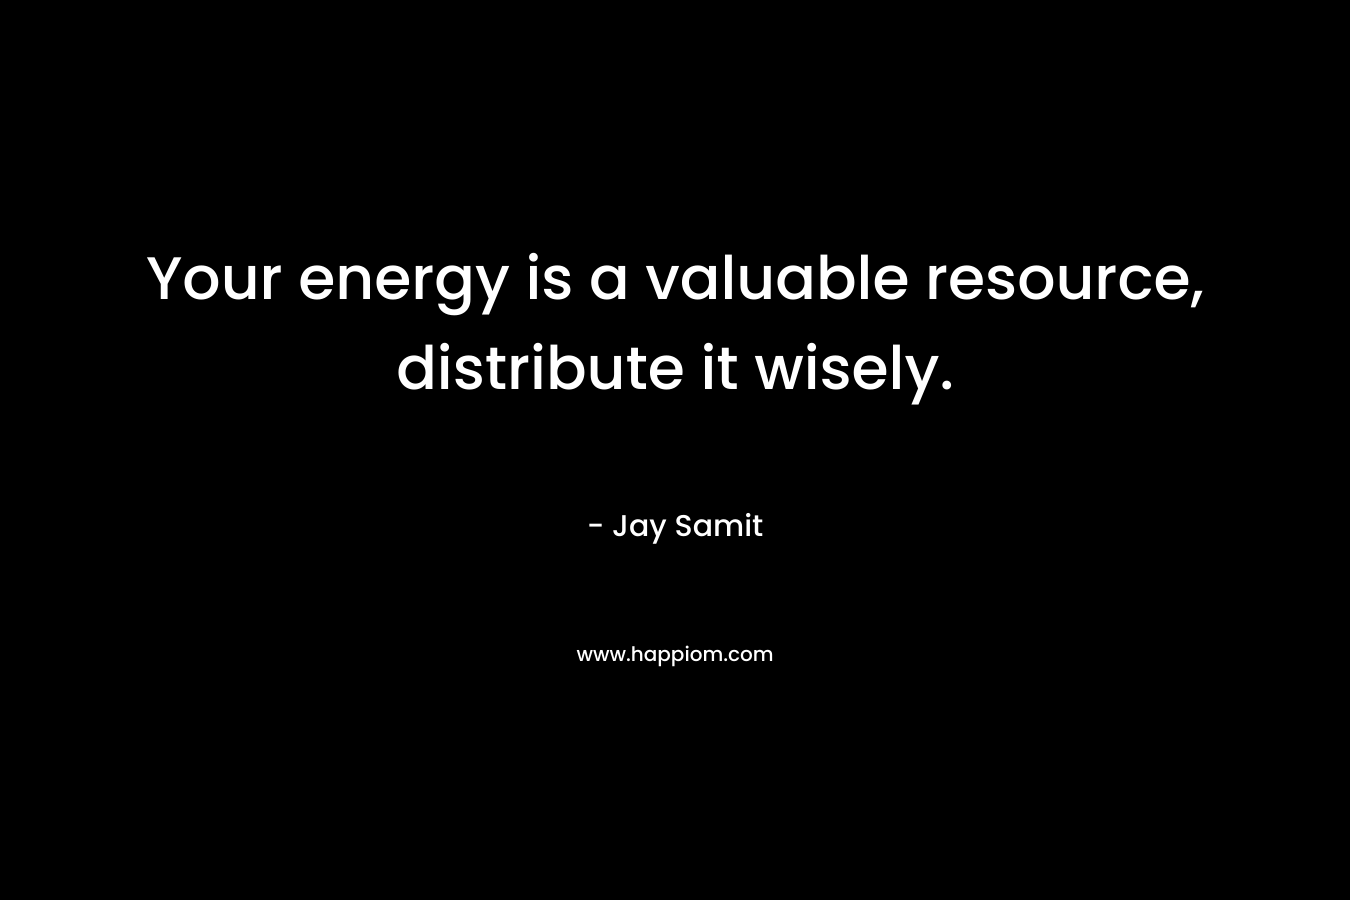 Your energy is a valuable resource, distribute it wisely. – Jay Samit